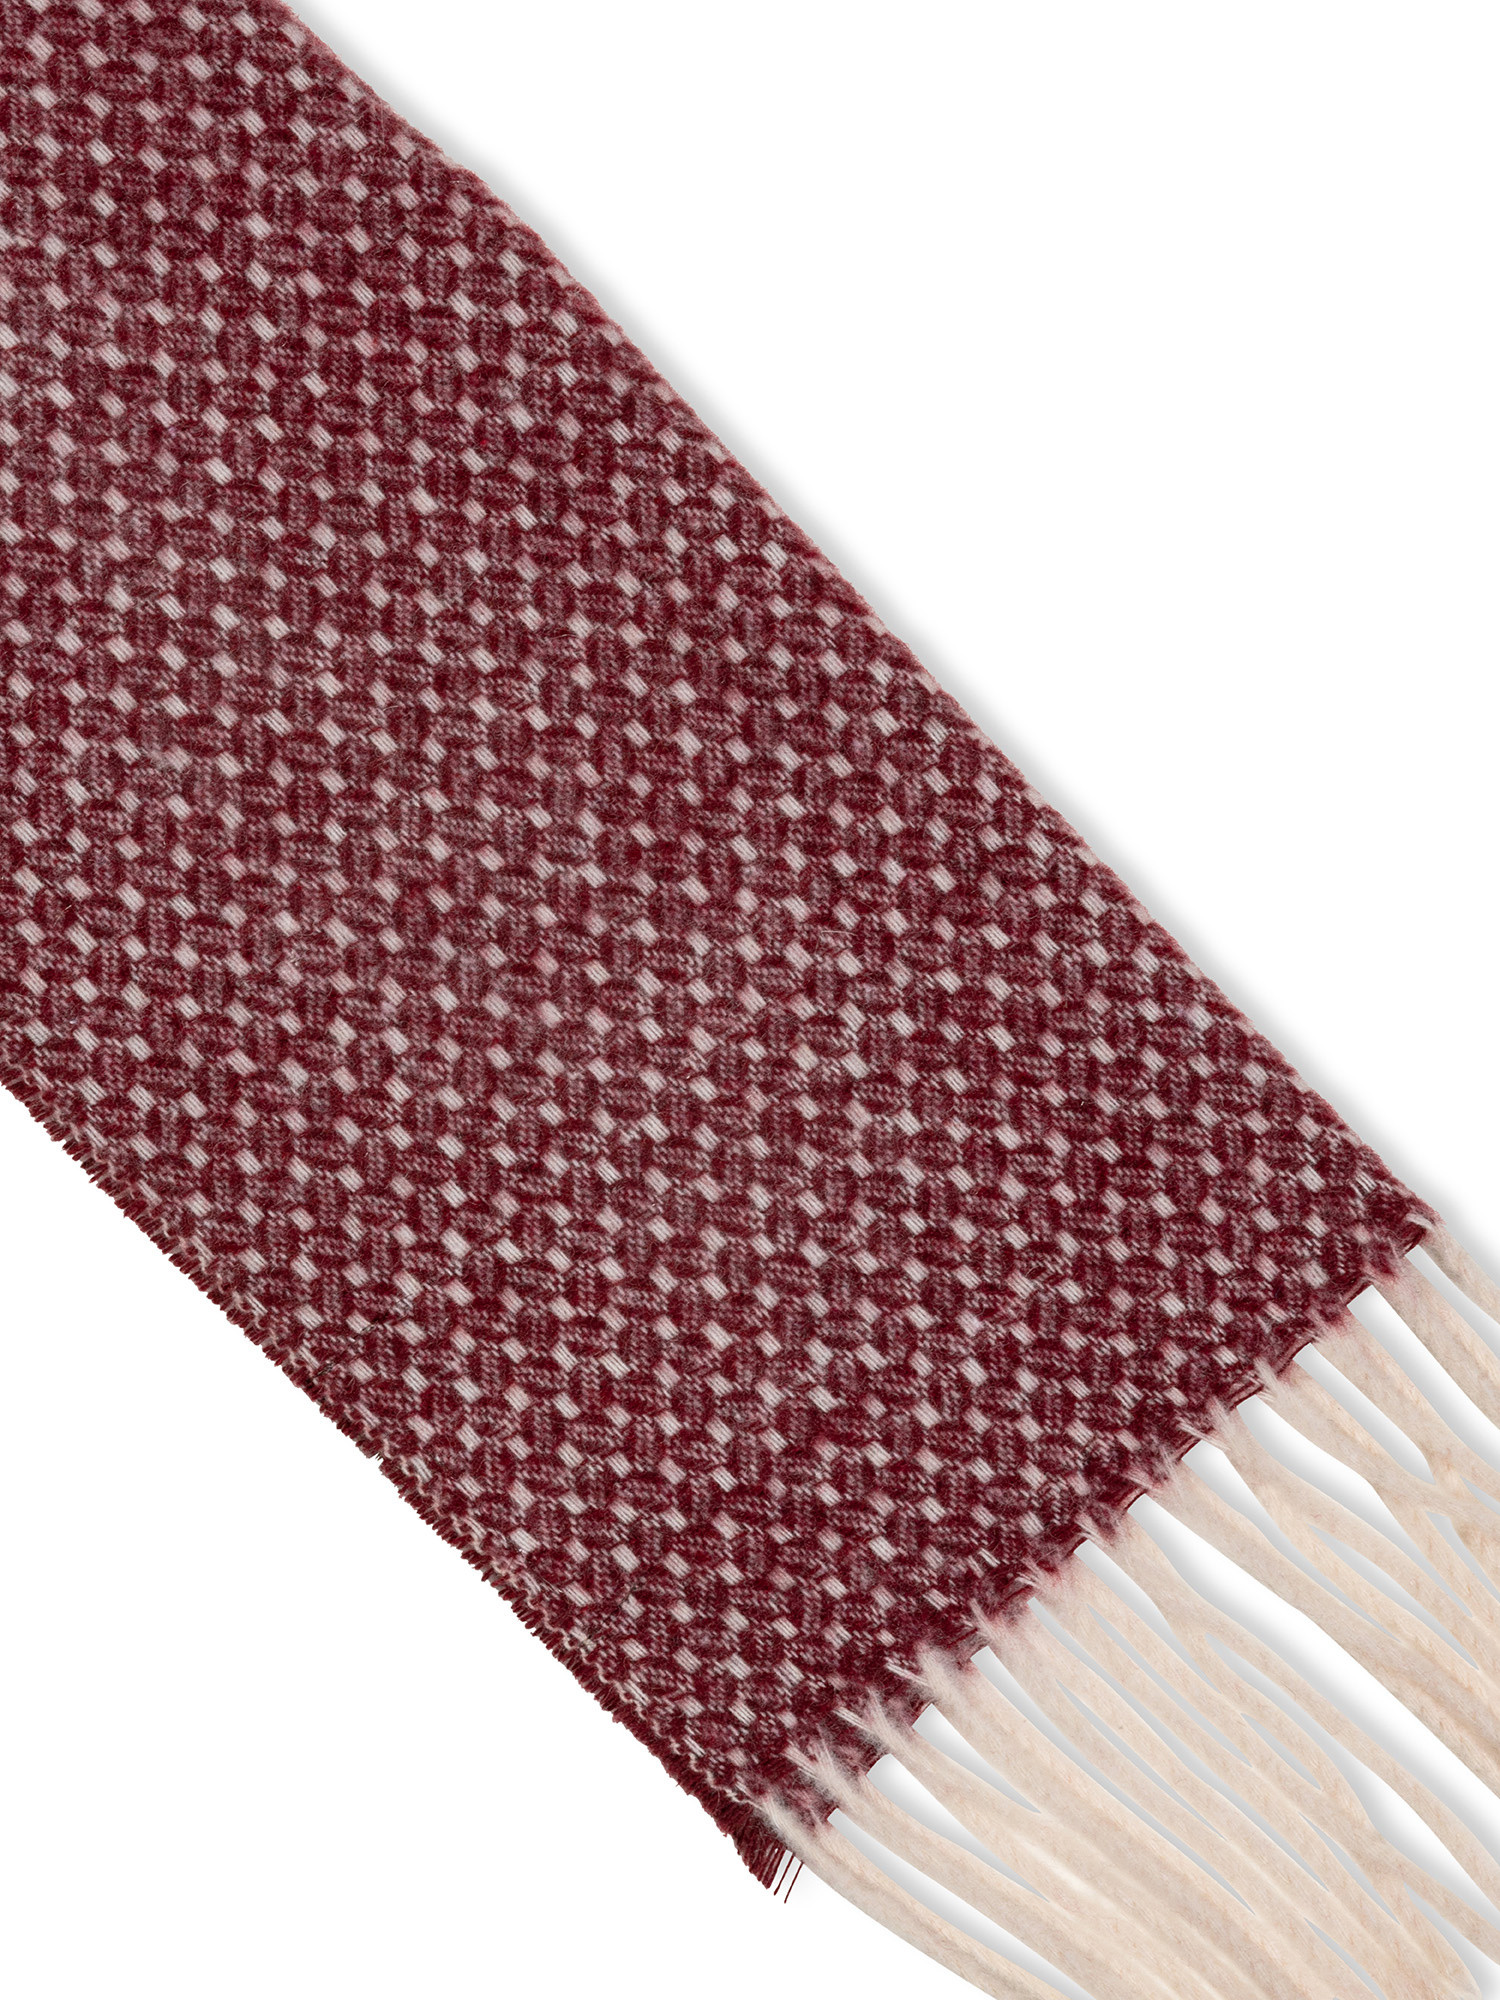 Luca D'Altieri - Micro patterned scarf, Red Bordeaux, large image number 1